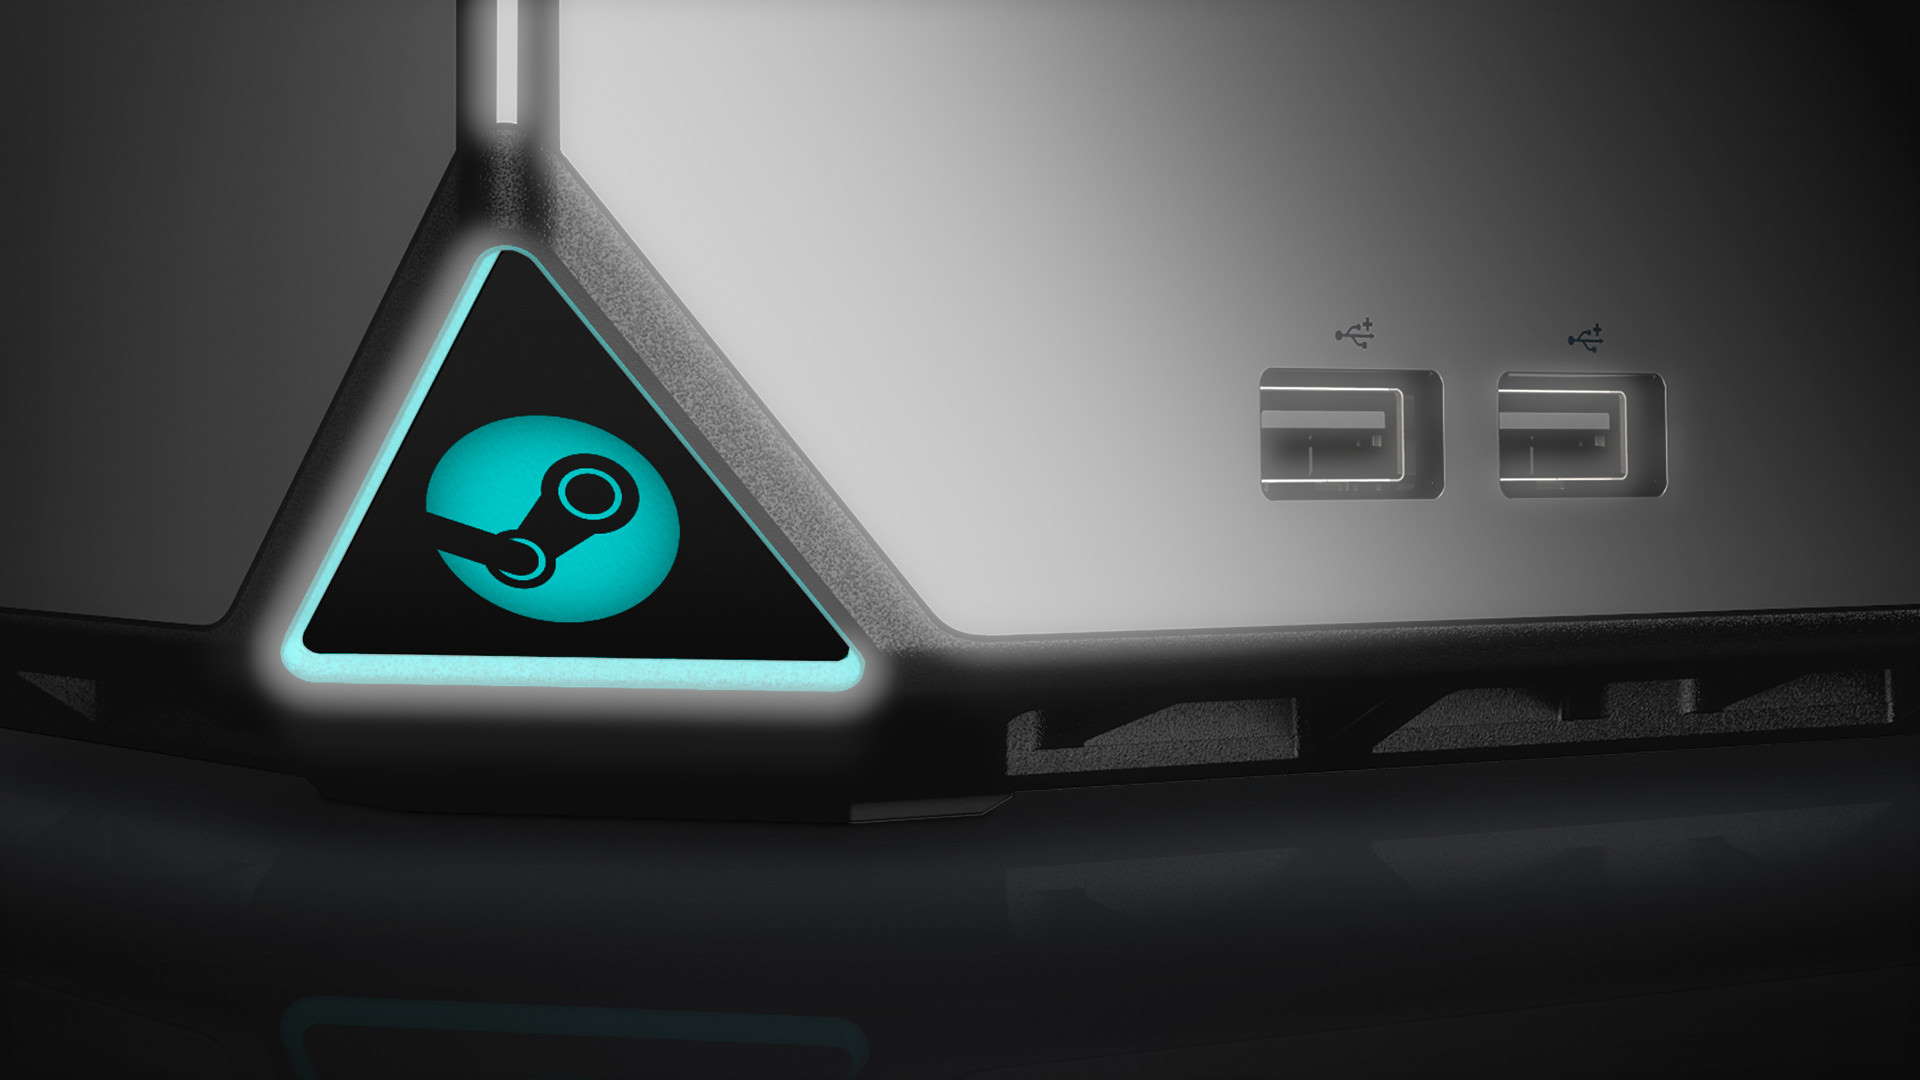 Valve releases both Steam Machine and SteamOS